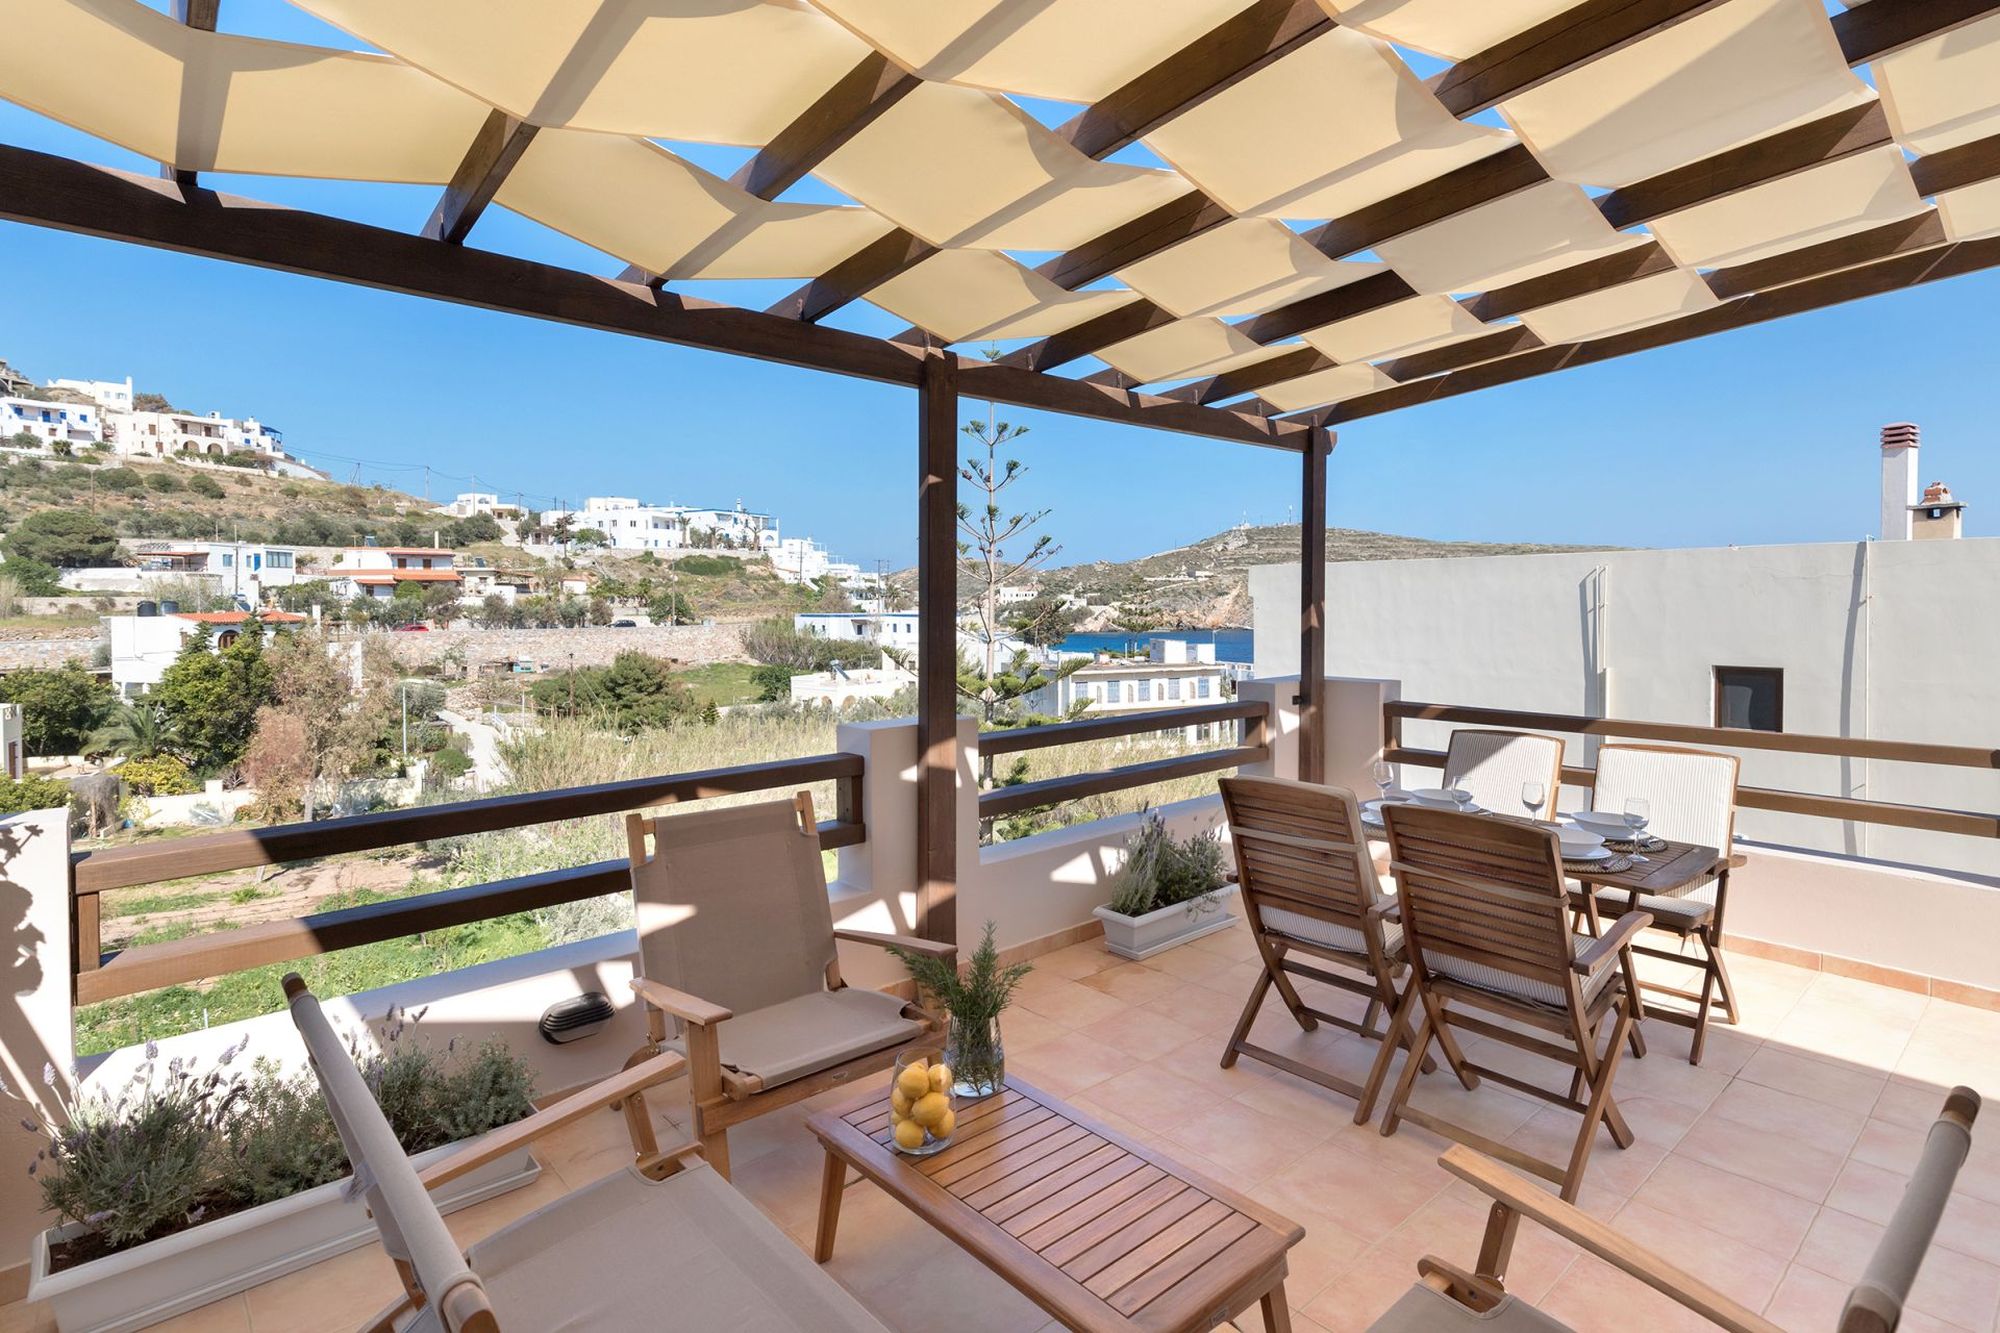 Fully furnished sea view veranda with pergola, lounge and dining table for four persons.